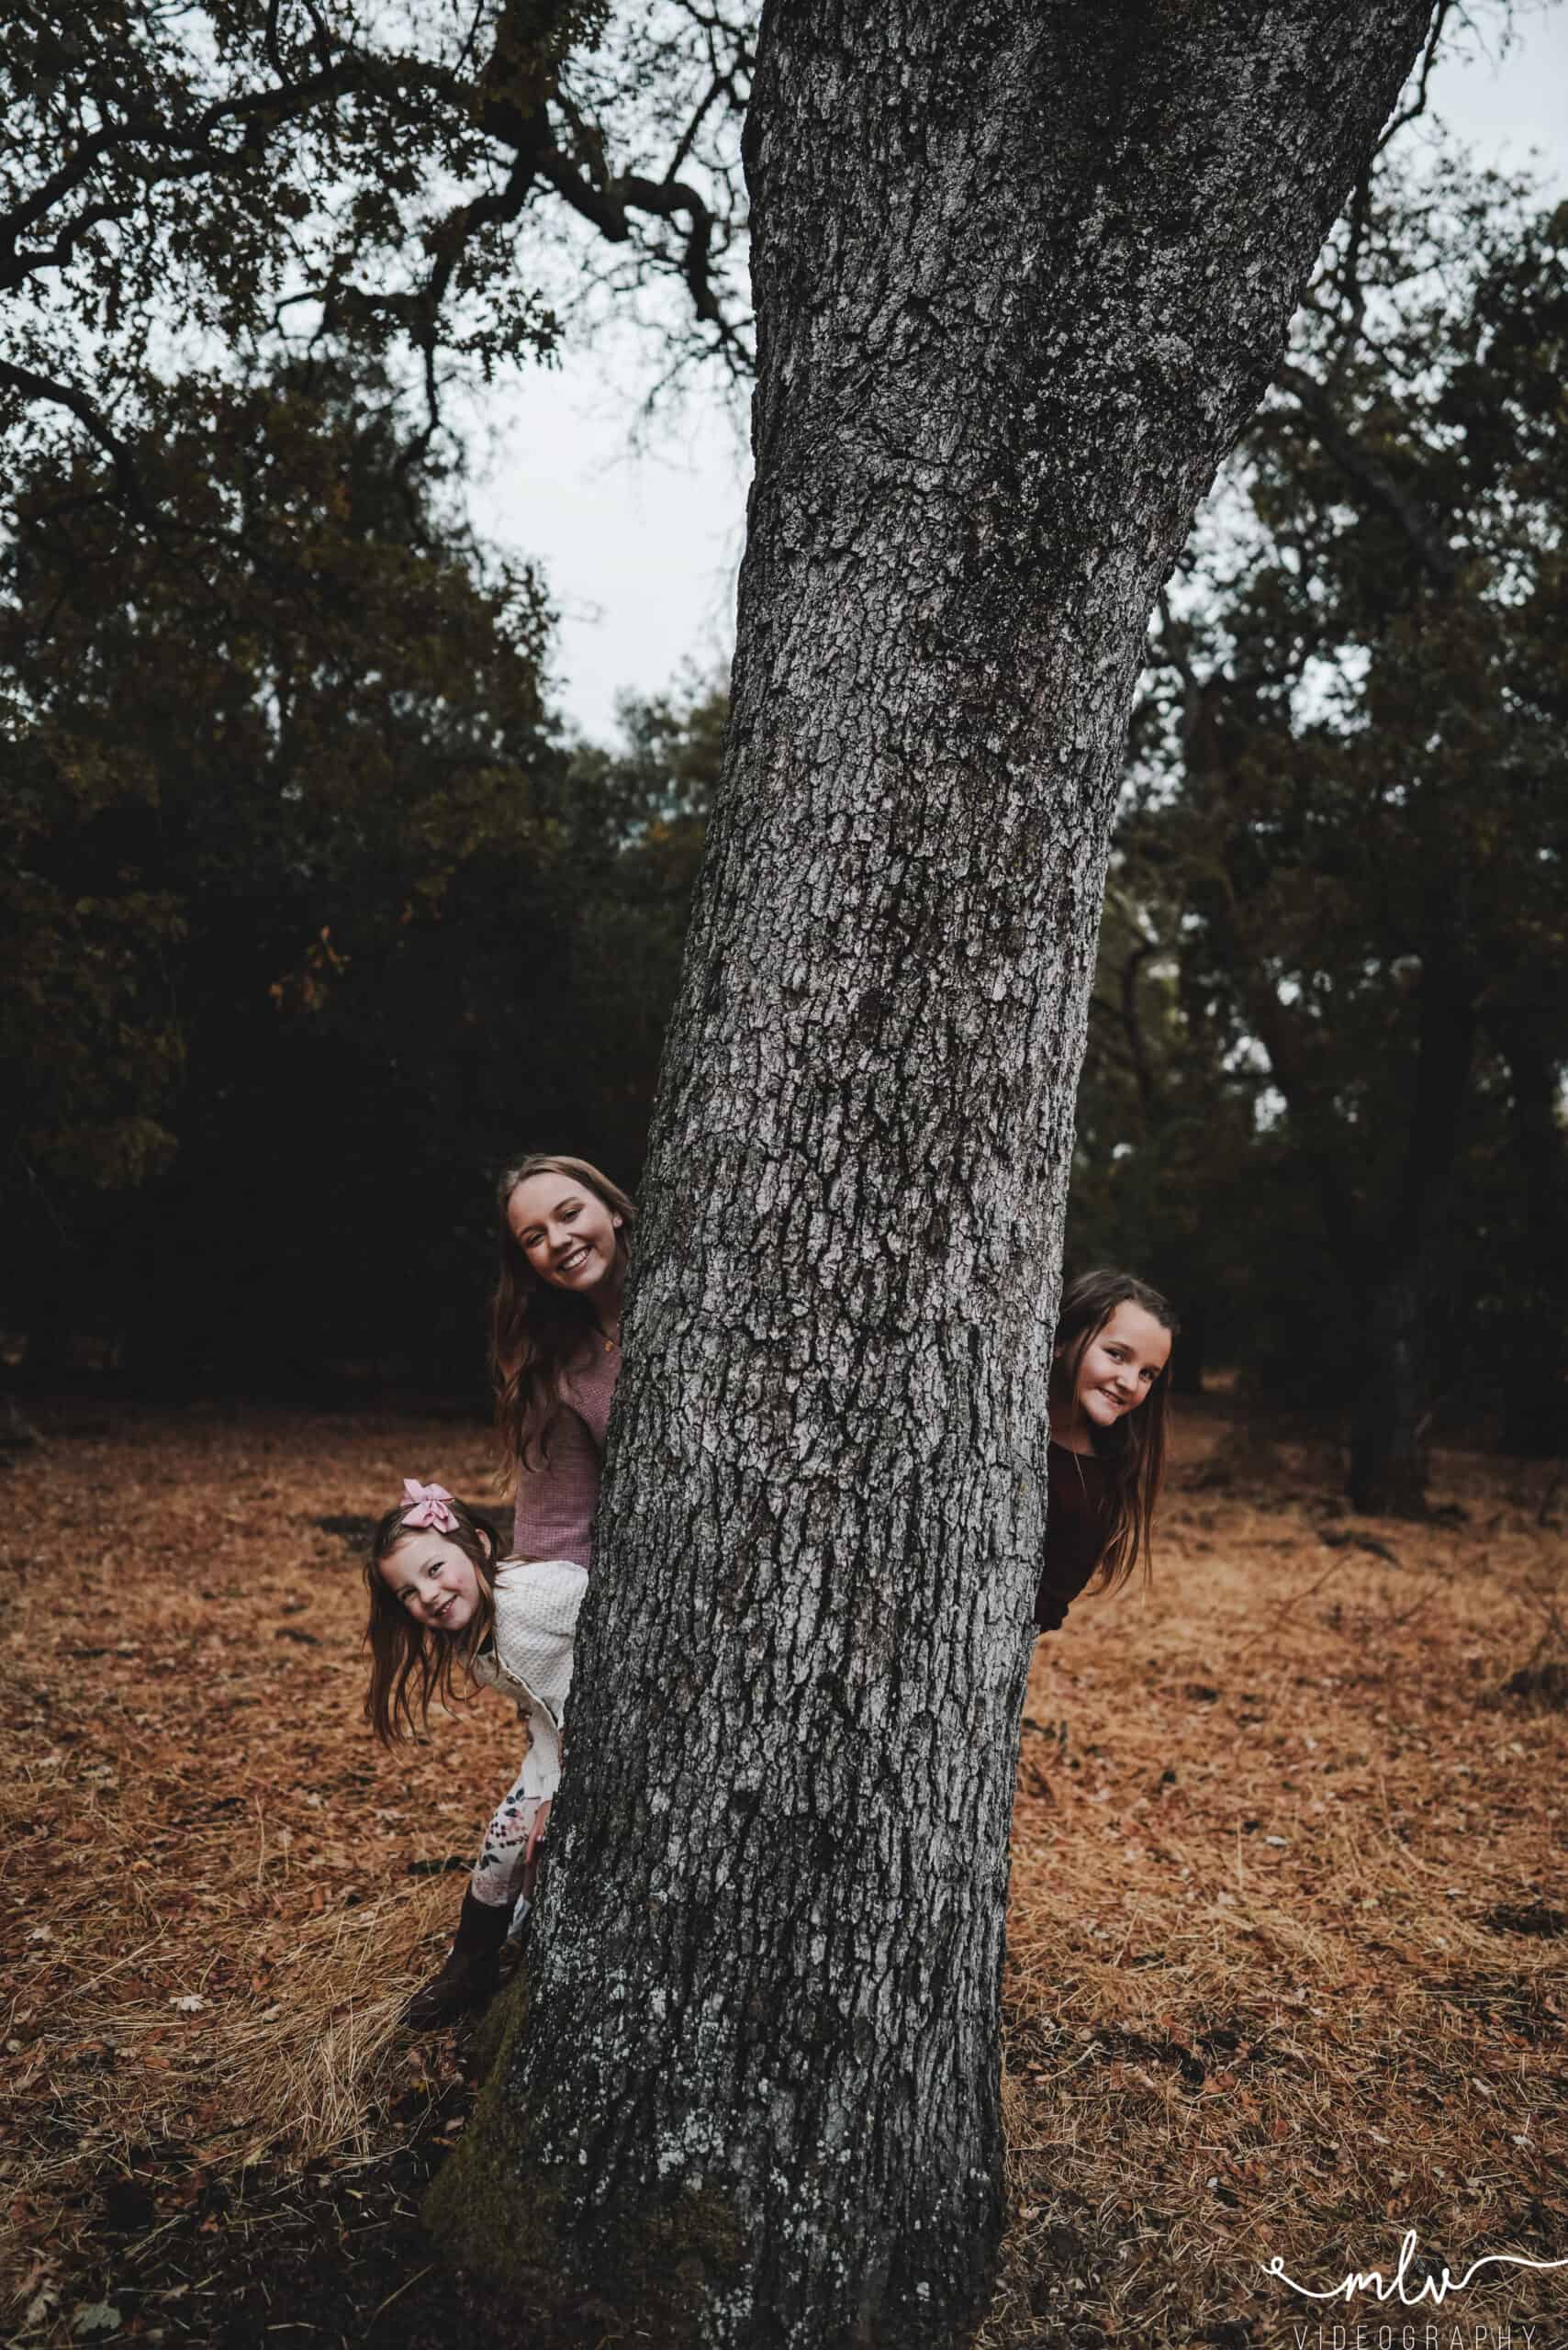 Family Photography at Guadalupe Oak Grove Trail in San Jose, California.